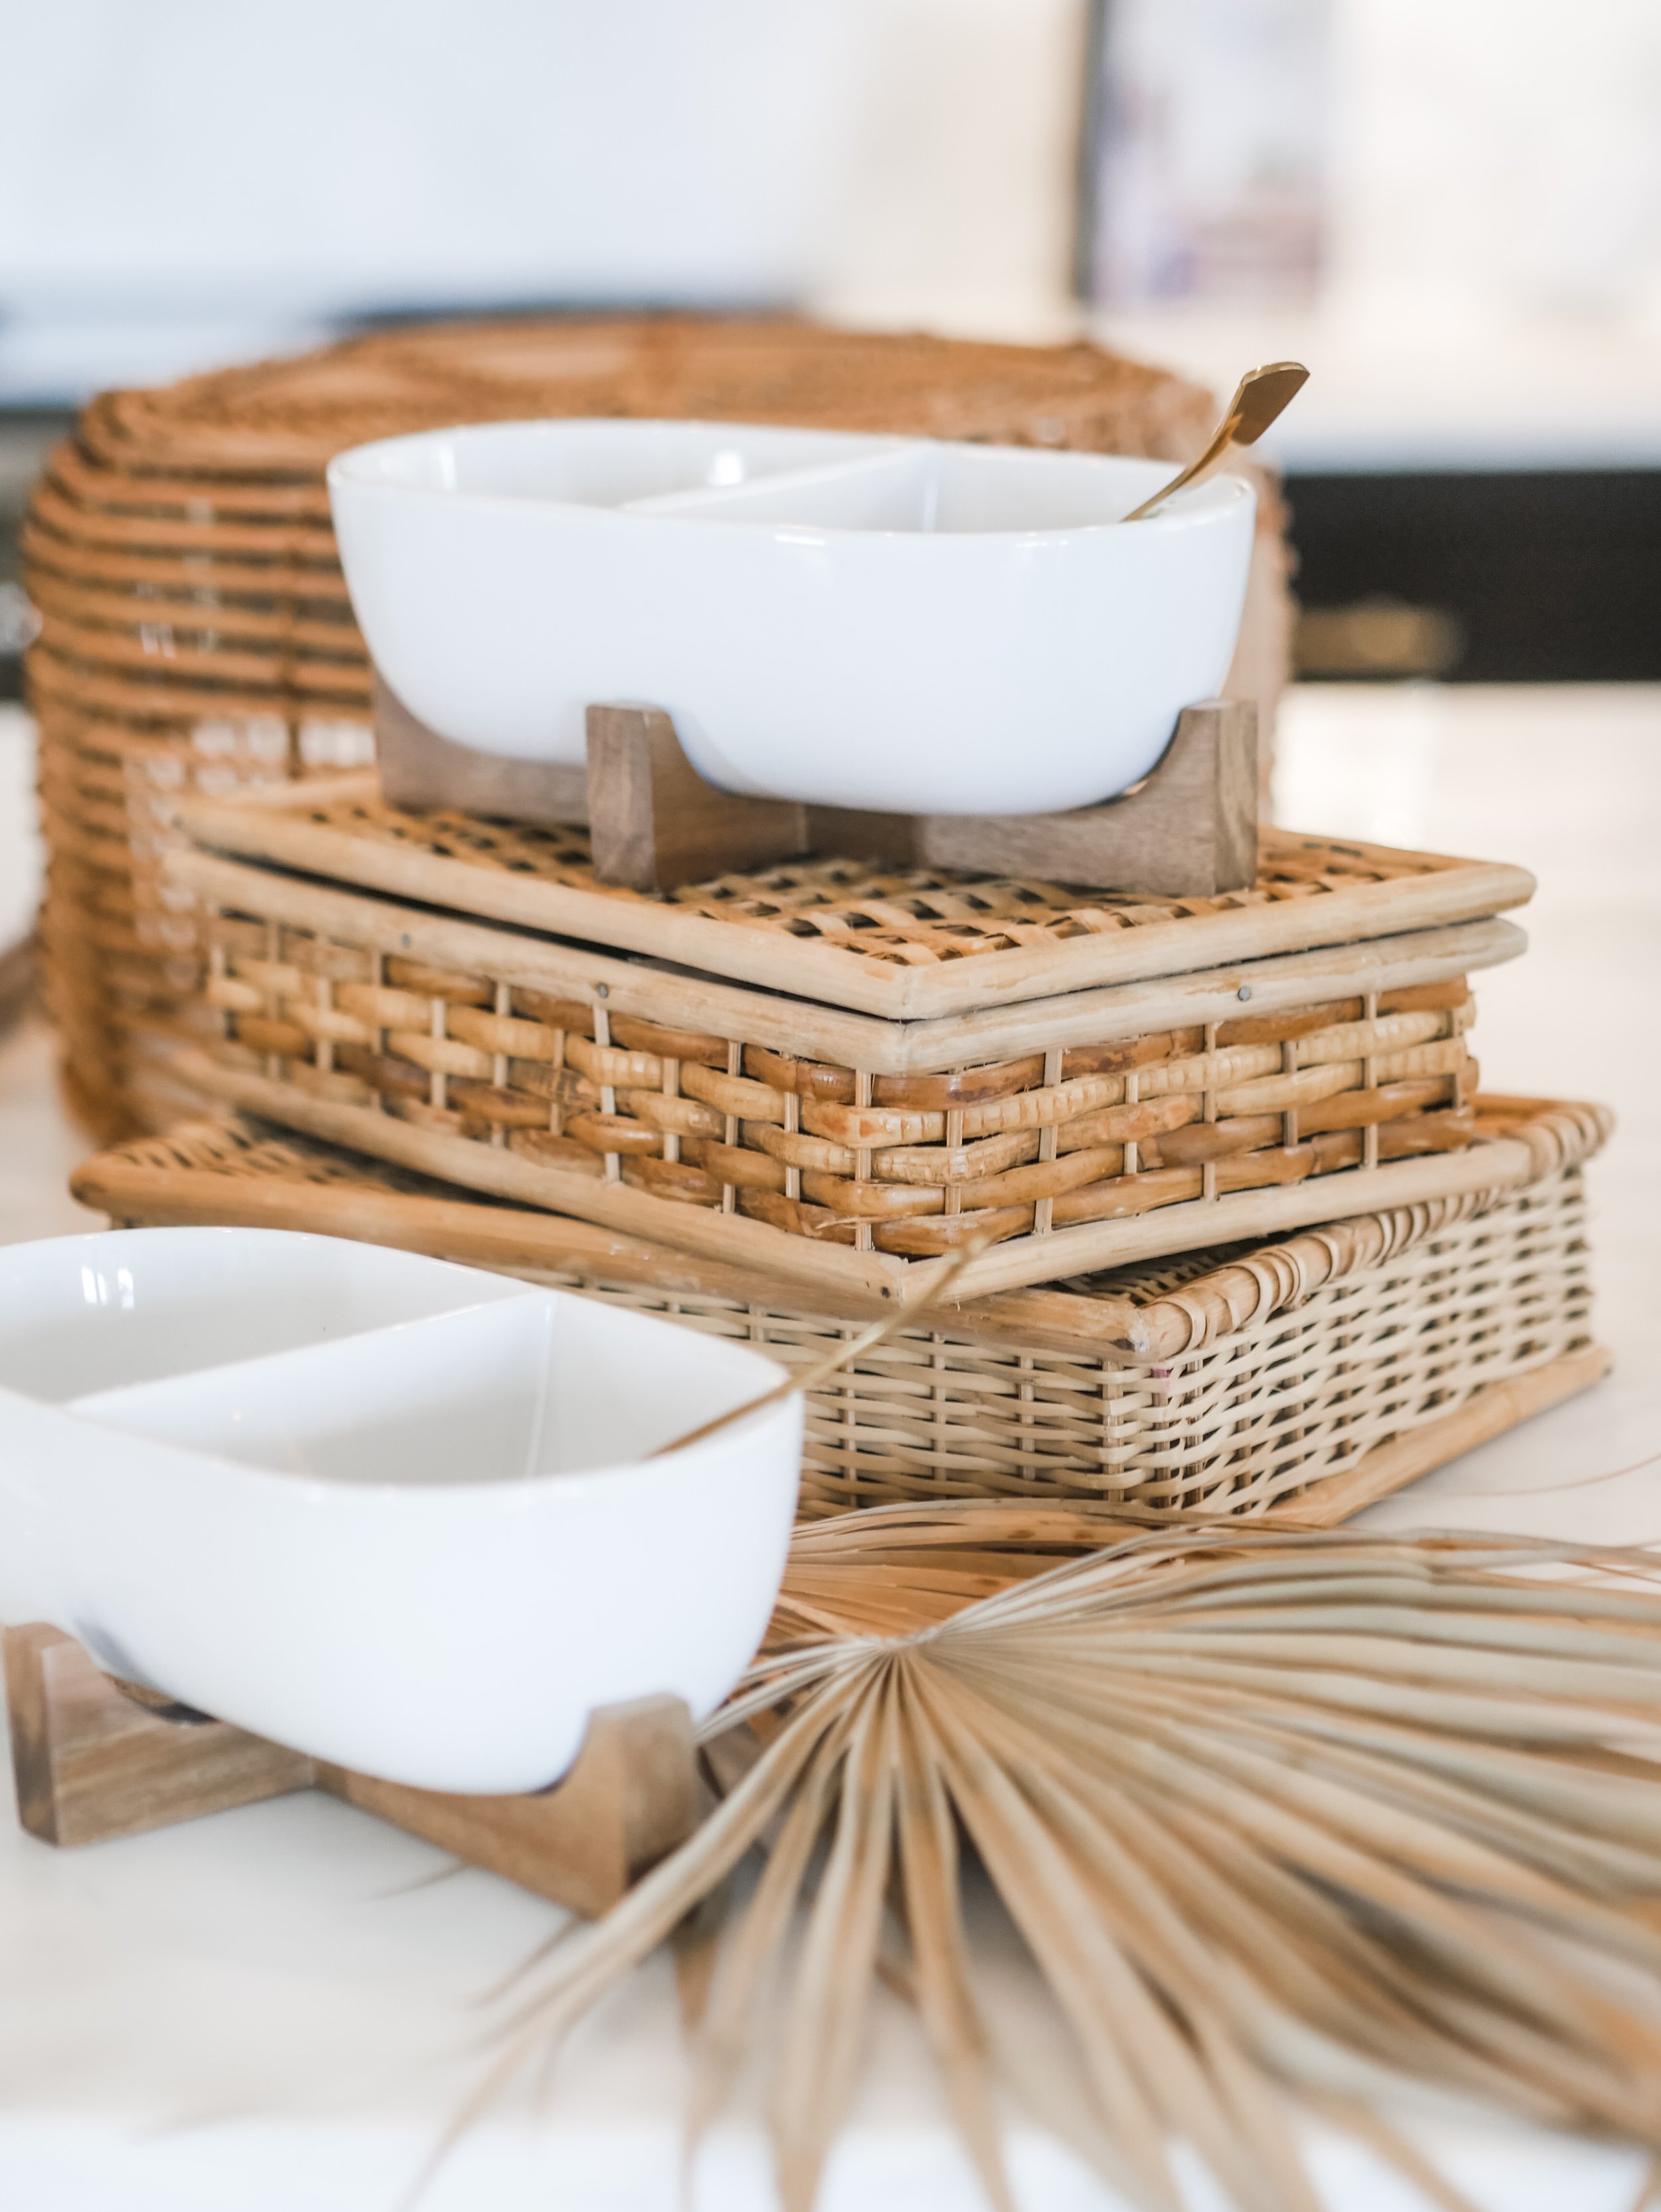  Elegant food containers - Host a stylish and relaxed Tulum beach-inspired Baby Shower with these ideas for food bar, drink station, picnic style seating, decor and more from event designer Carolina of MINT Event Design in Austin, Texas. Get details 